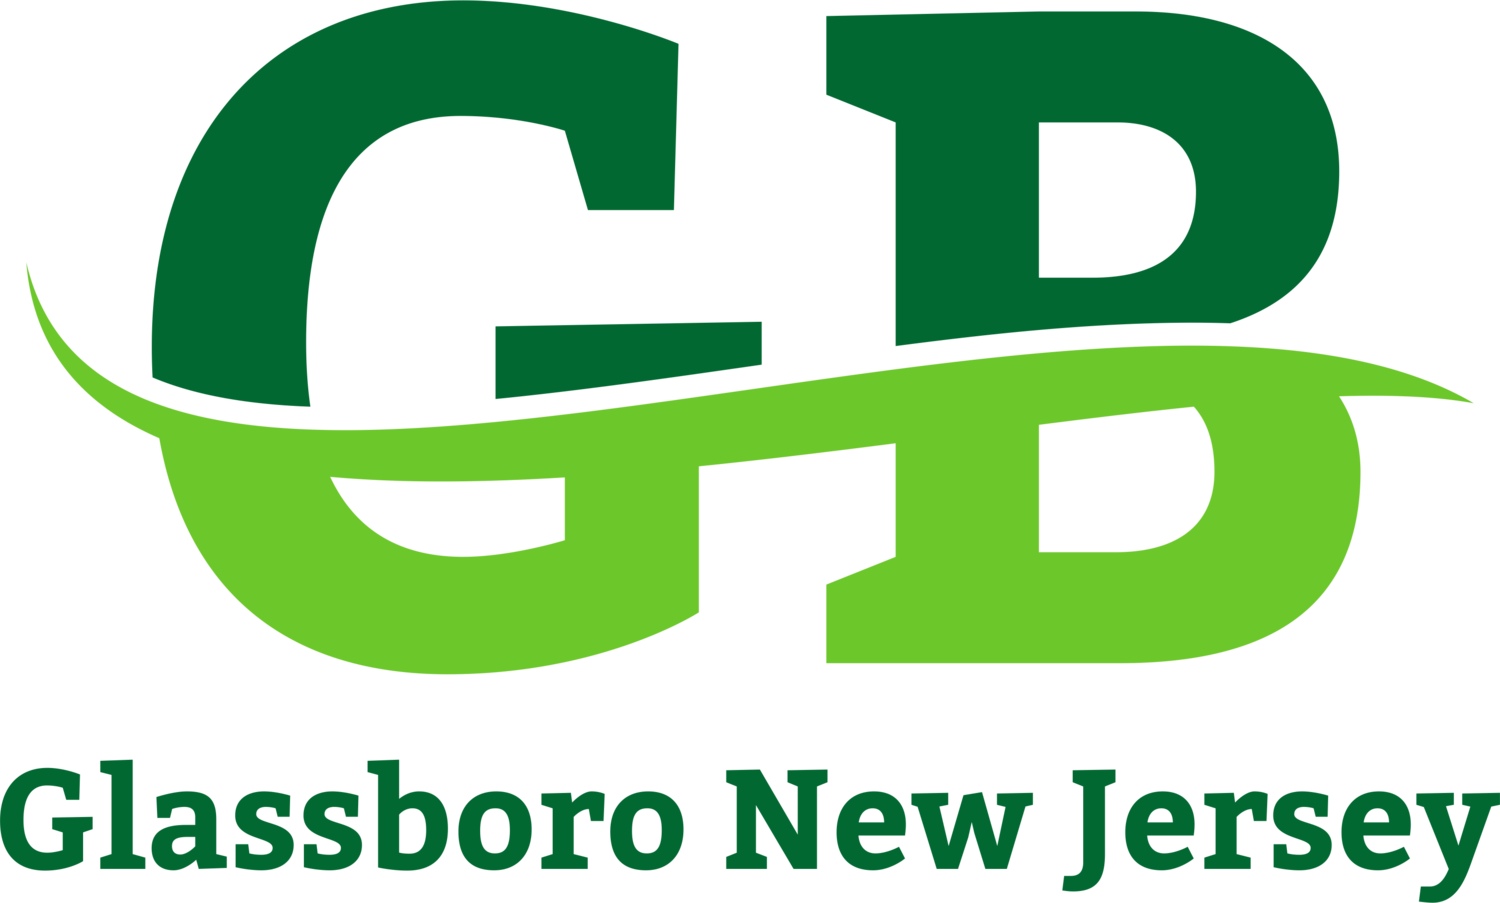 Official Website of the Borough of Glassboro